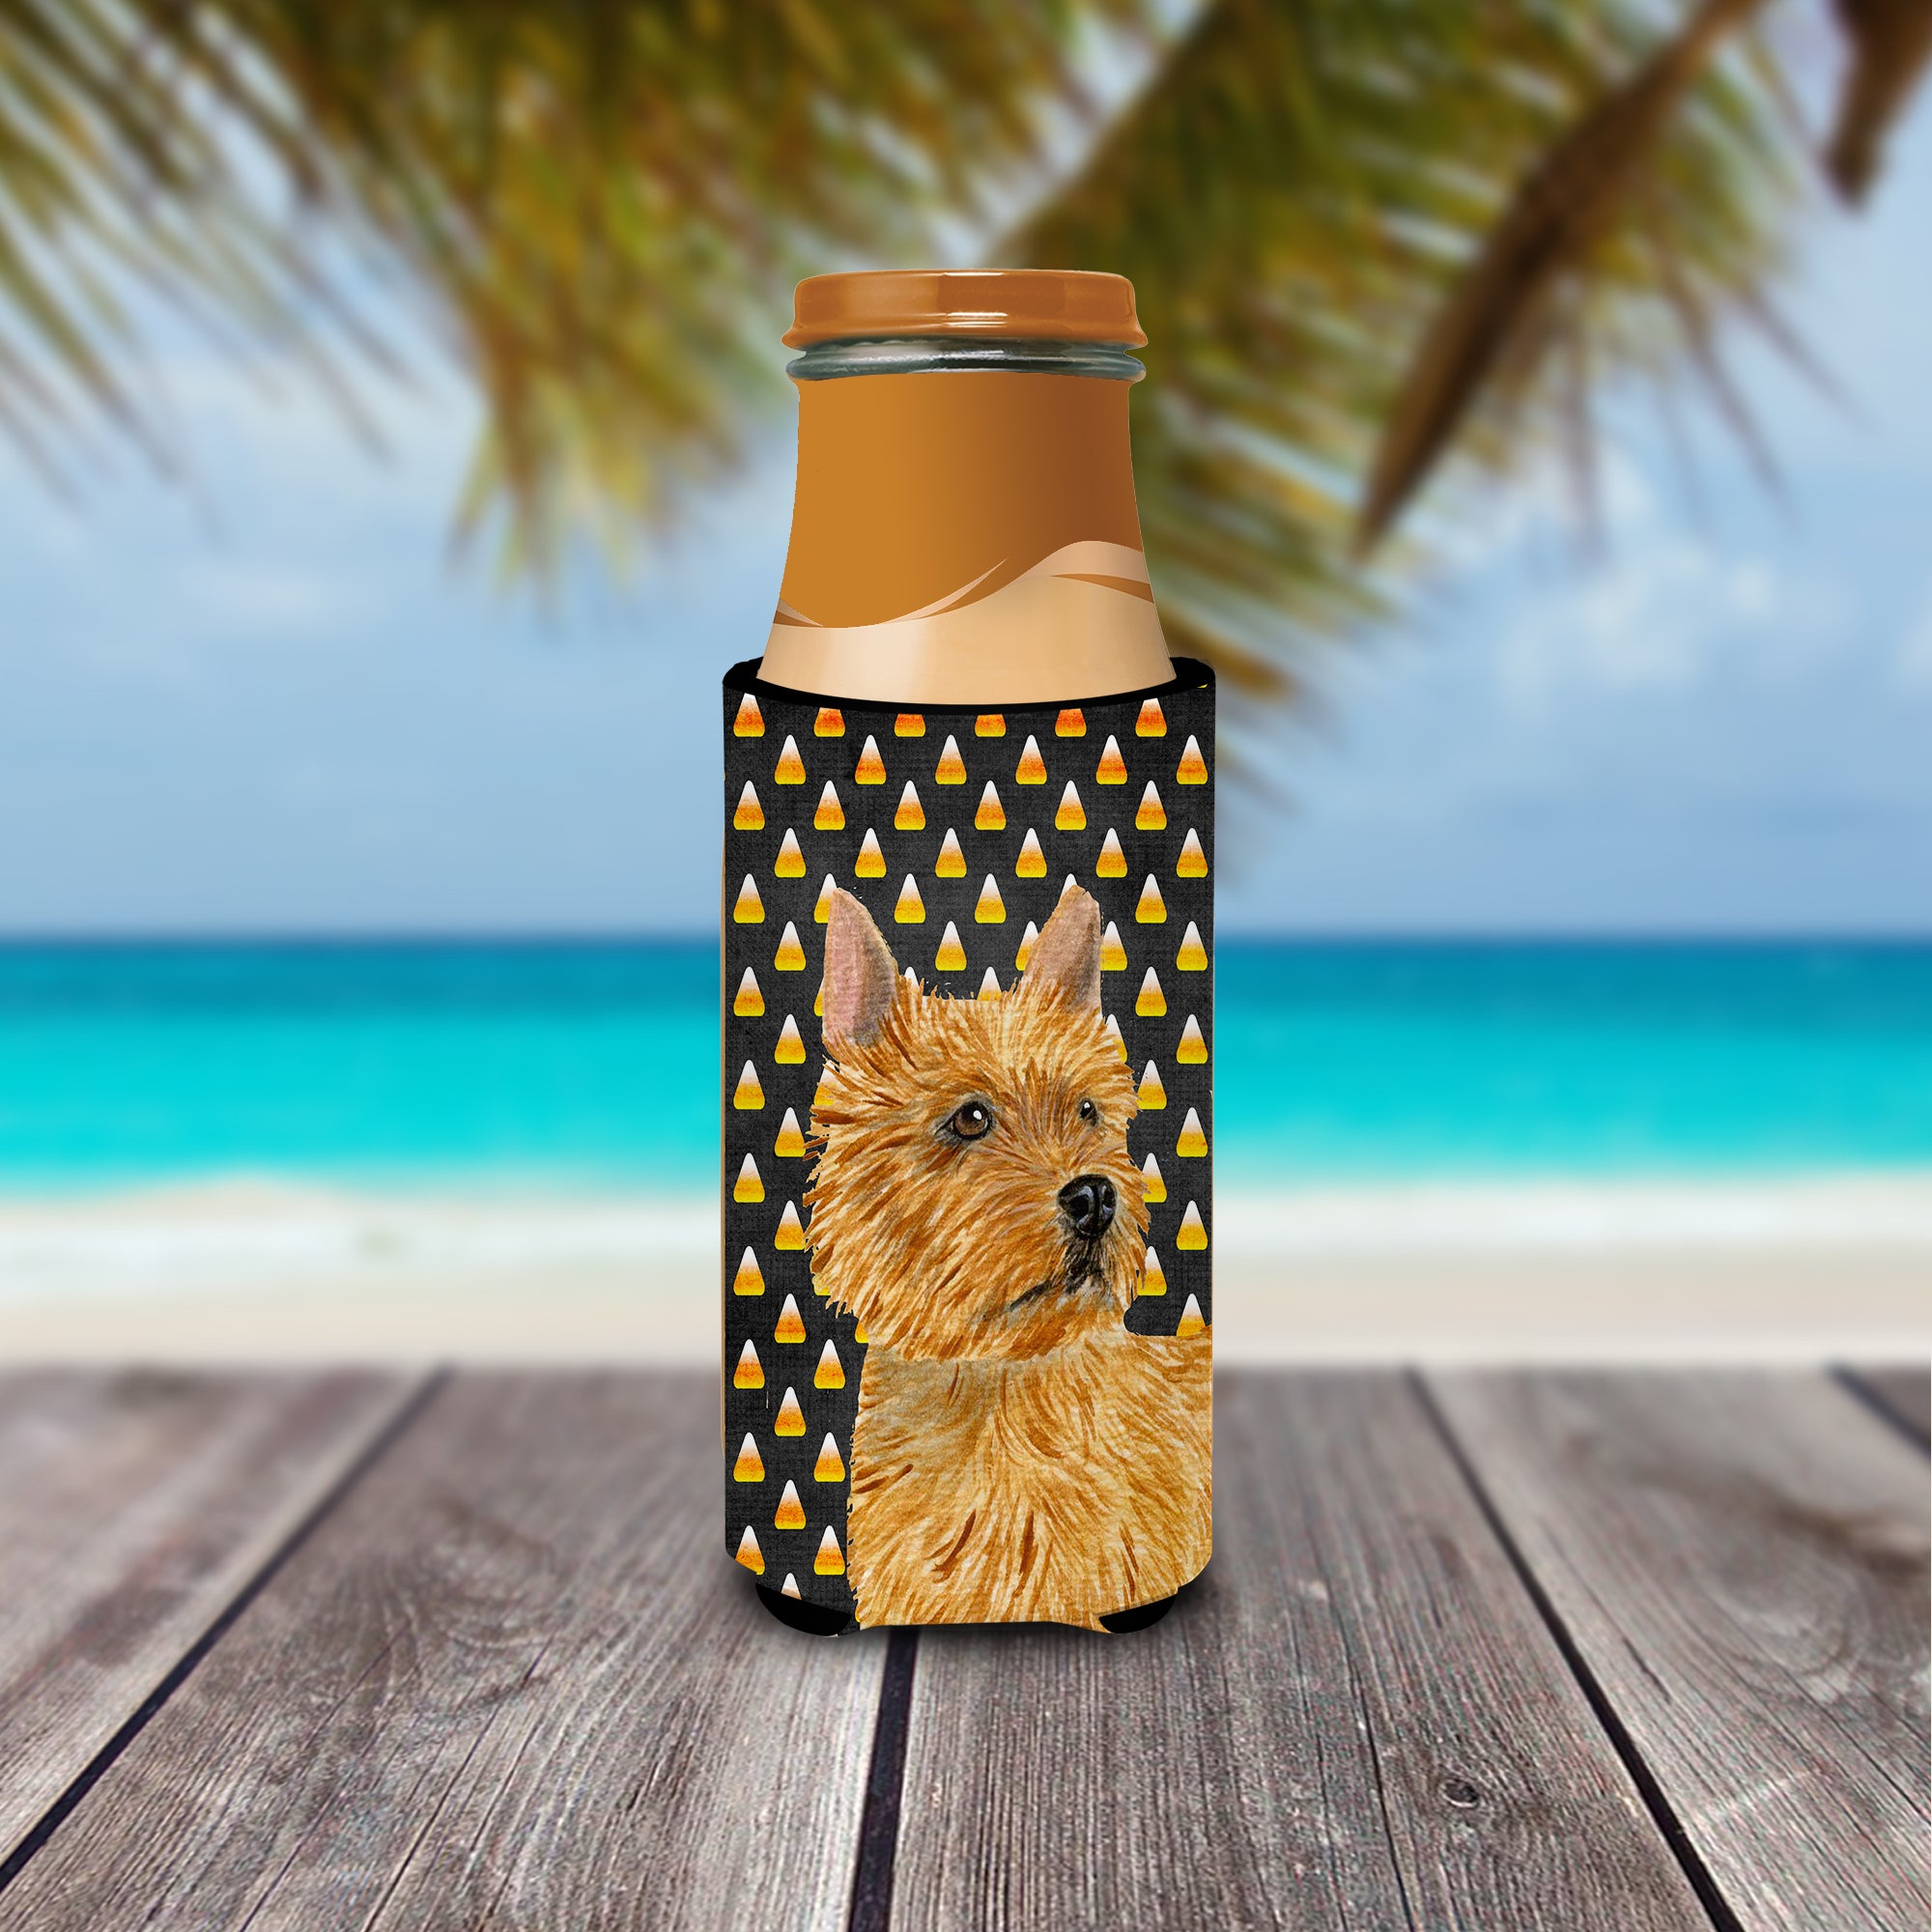 Norwich Terrier Candy Corn Halloween Portrait Ultra Beverage Insulators for slim cans SS4292MUK.